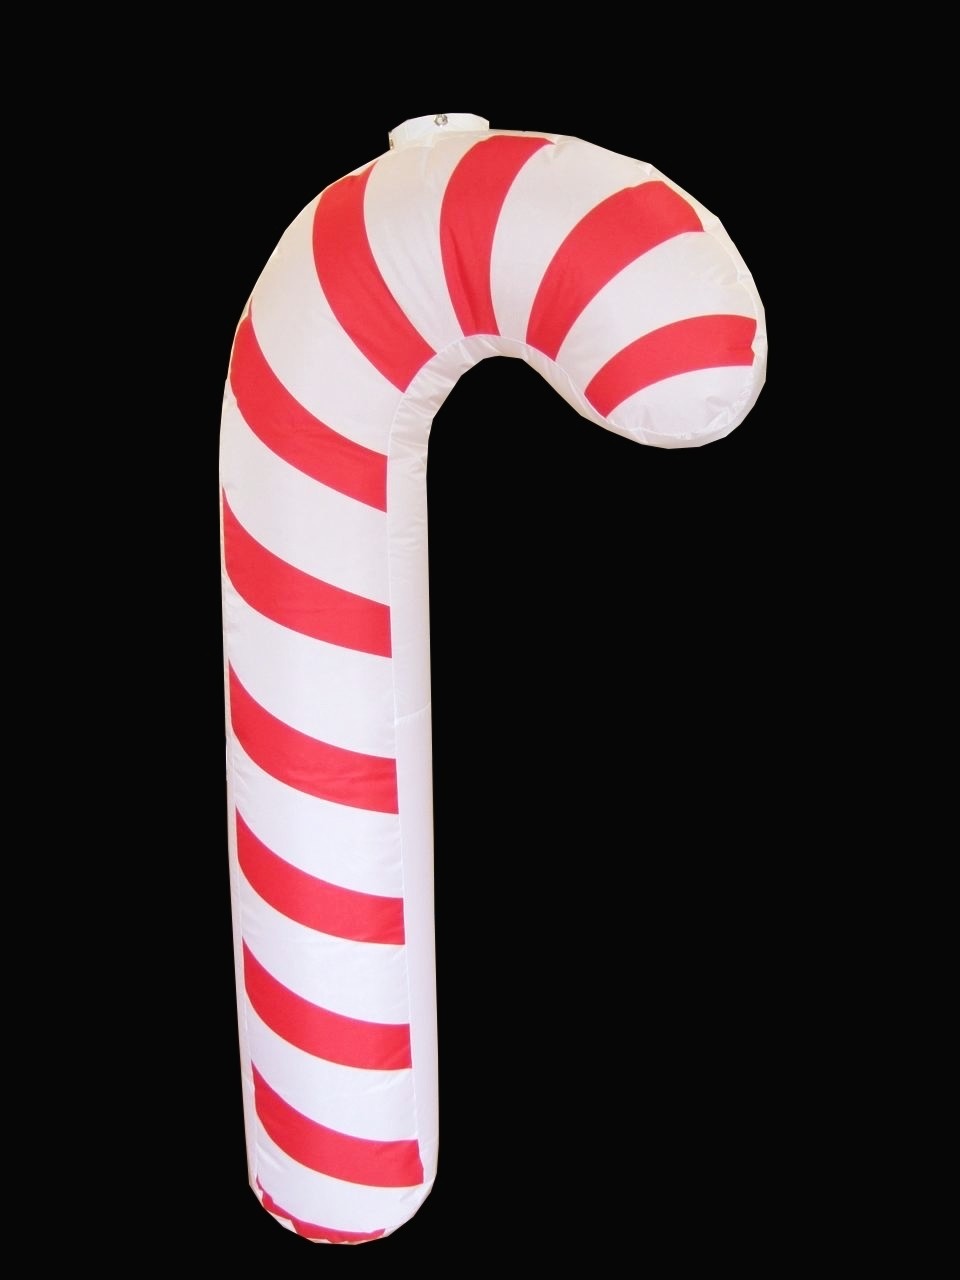 Hanging Inflatable Candy Cane 3ft/91cm x 6.2ft/188cm